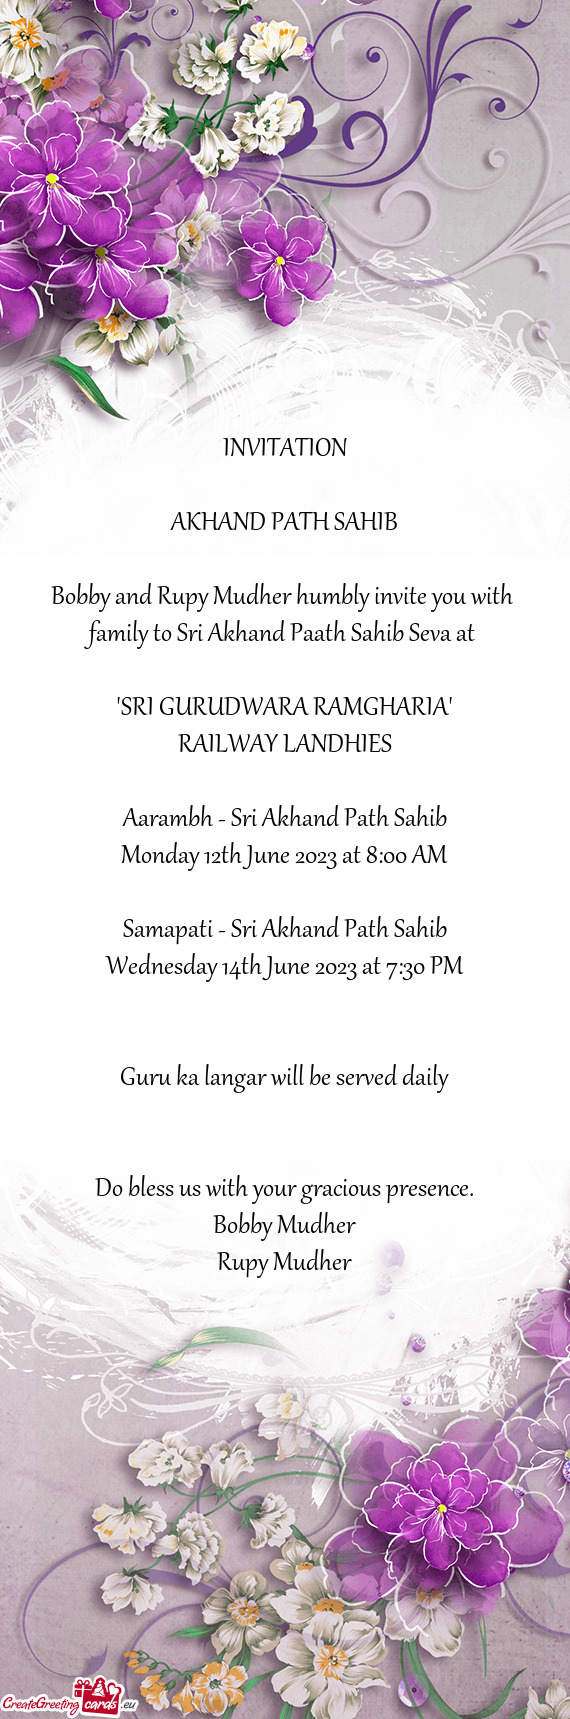 Bobby and Rupy Mudher humbly invite you with